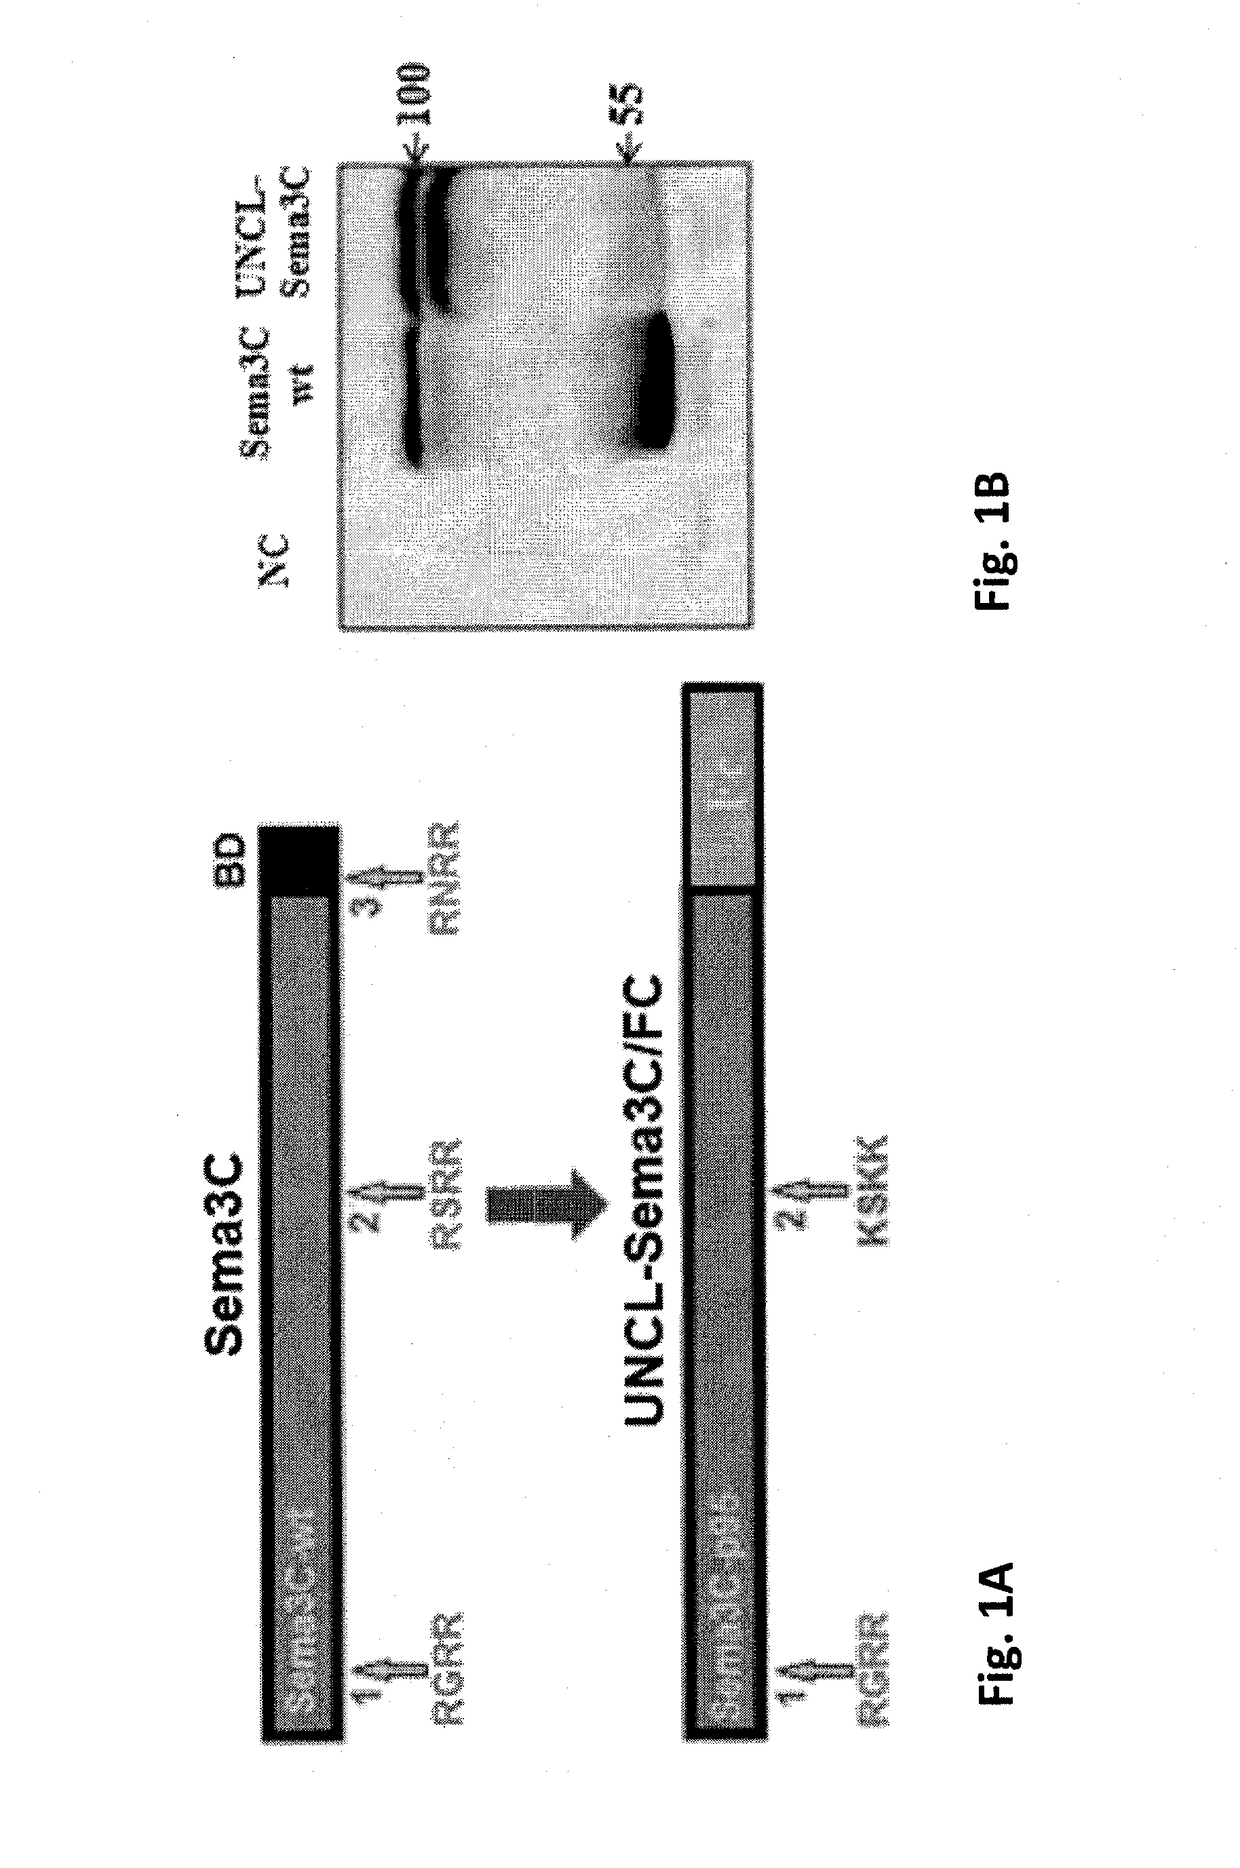 Semaphorin 3C variants, compositions comprising said variants and methods of use thereof